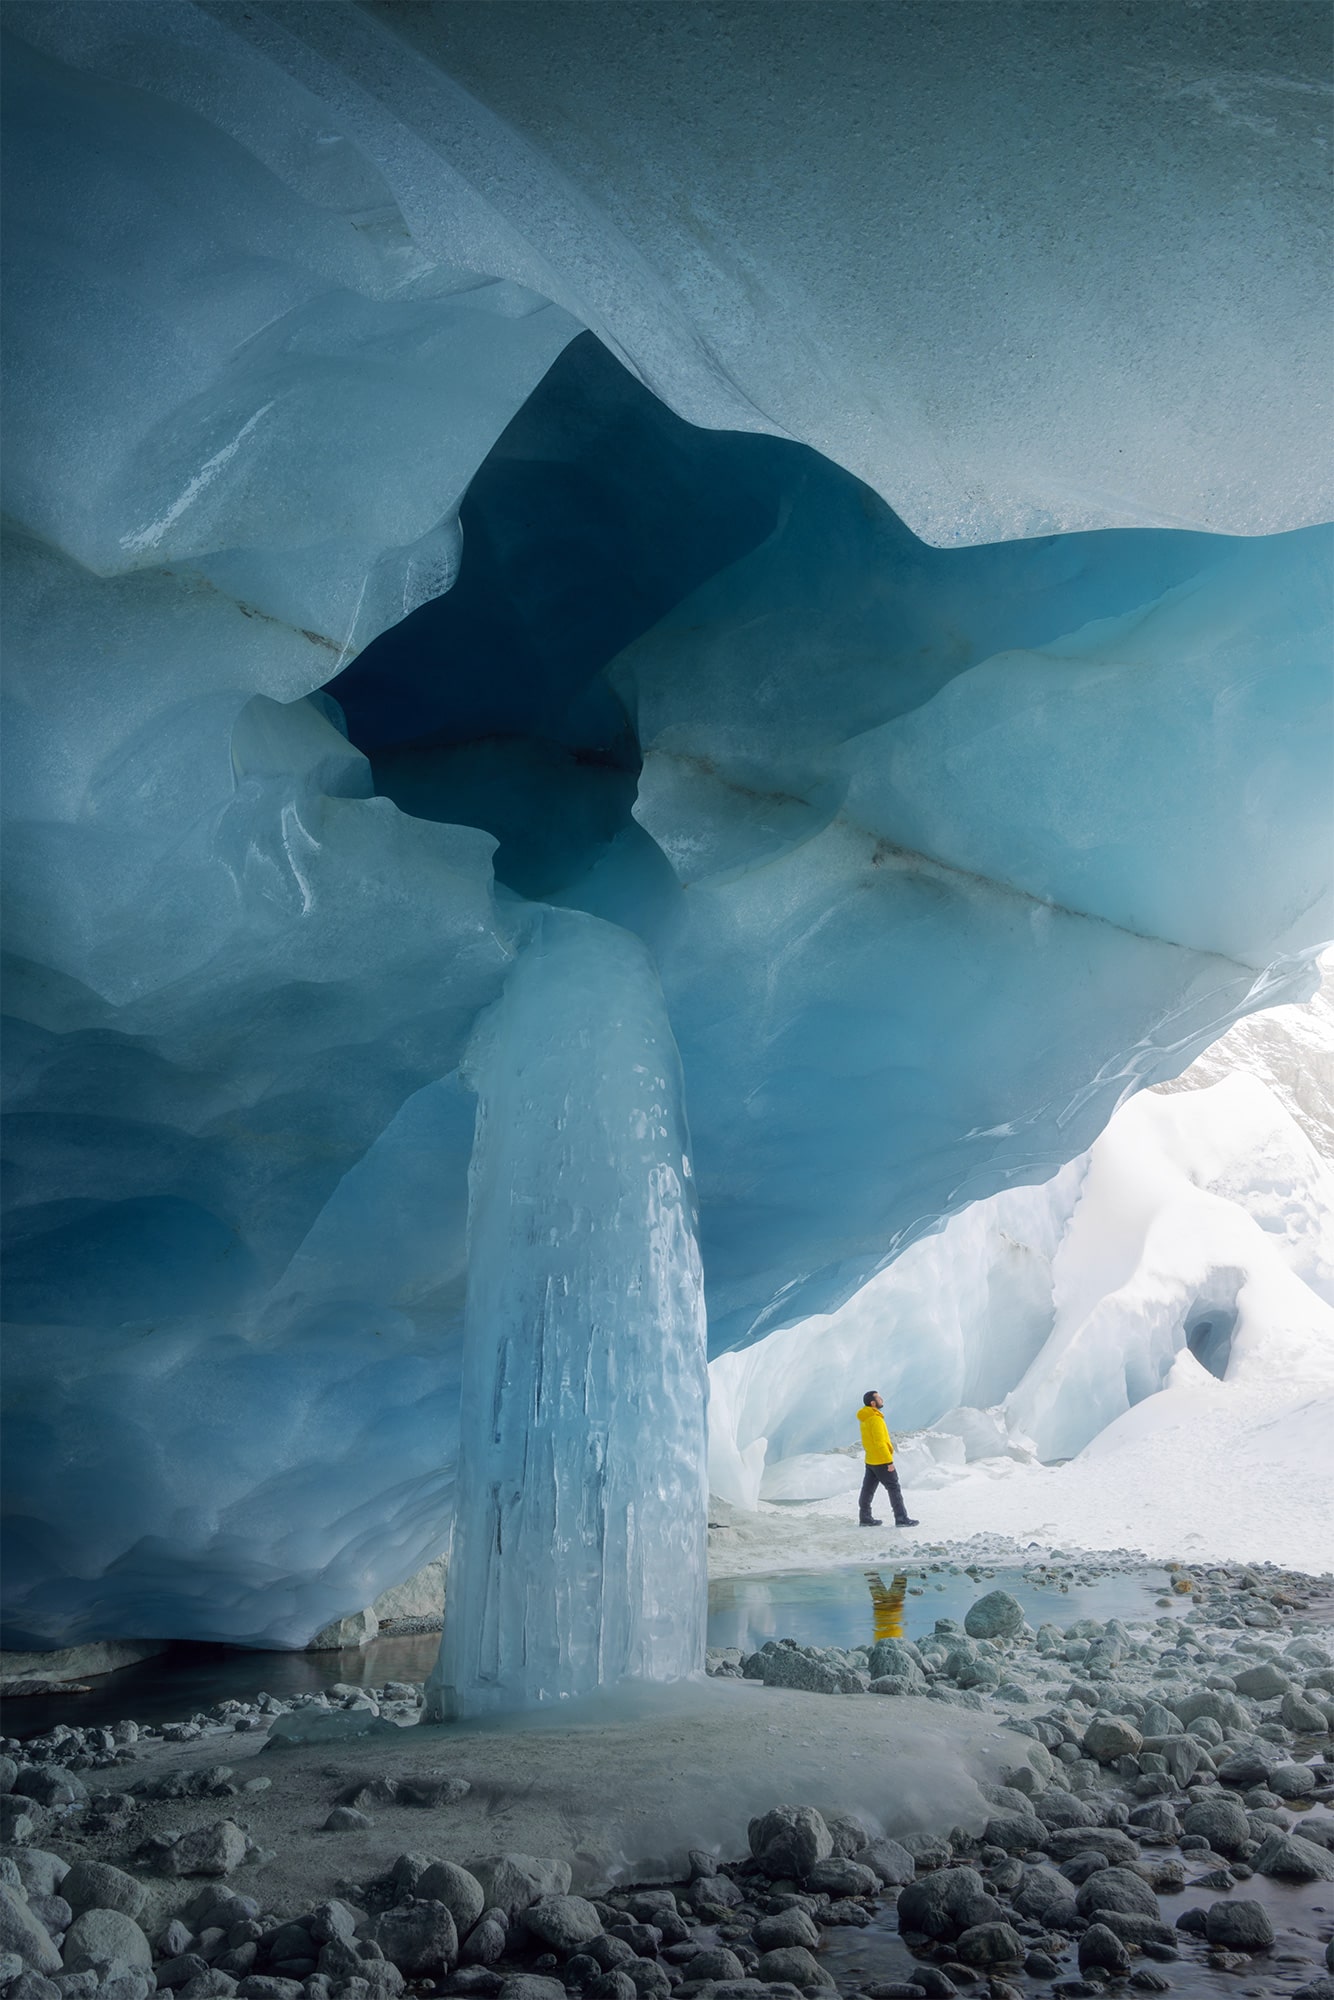 Experience the awe-inspiring beauty of the Zinal Ice Cave's frozen waterfall, with a person standing in vibrant yellow just outside the cave entrance, captured in Switzerland by acclaimed Swiss photographer Jennifer Esseiva using her Nikon D810. This mesmerizing landscape photography showcases the crystal blue ice of the cave, offering a stunning glimpse into the natural wonders of Switzerland's icy landscapes.